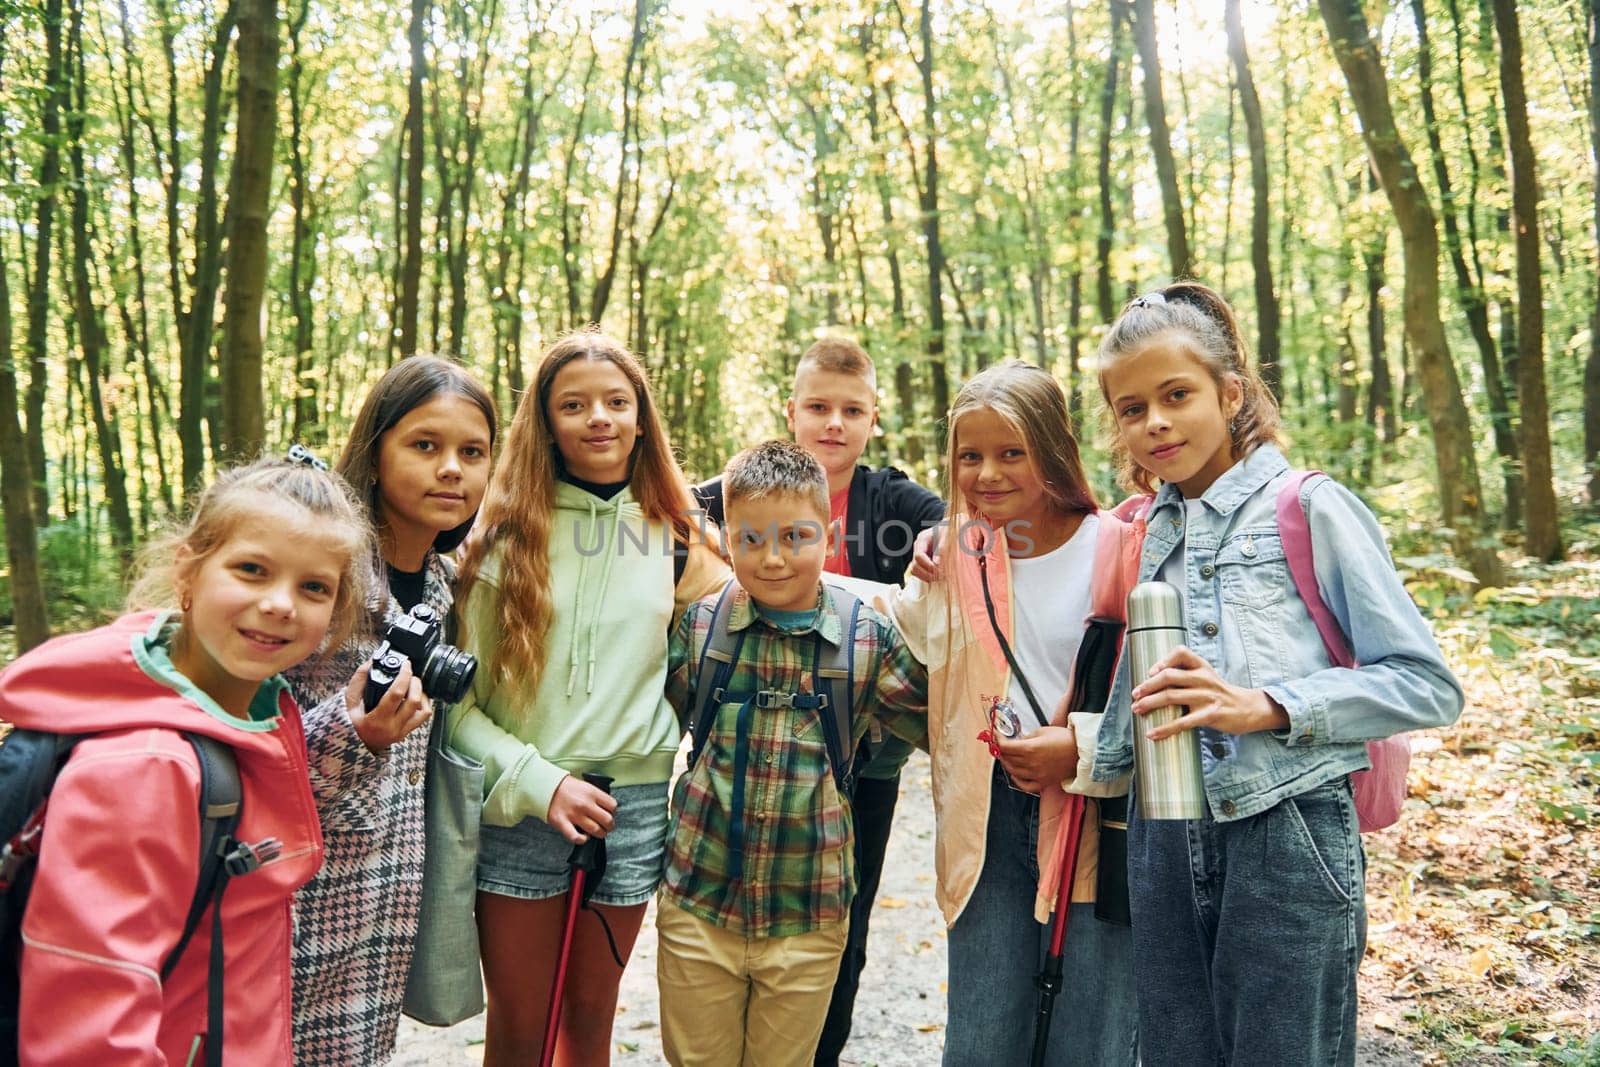 Standing together. Kids in green forest at summer daytime together by Standret